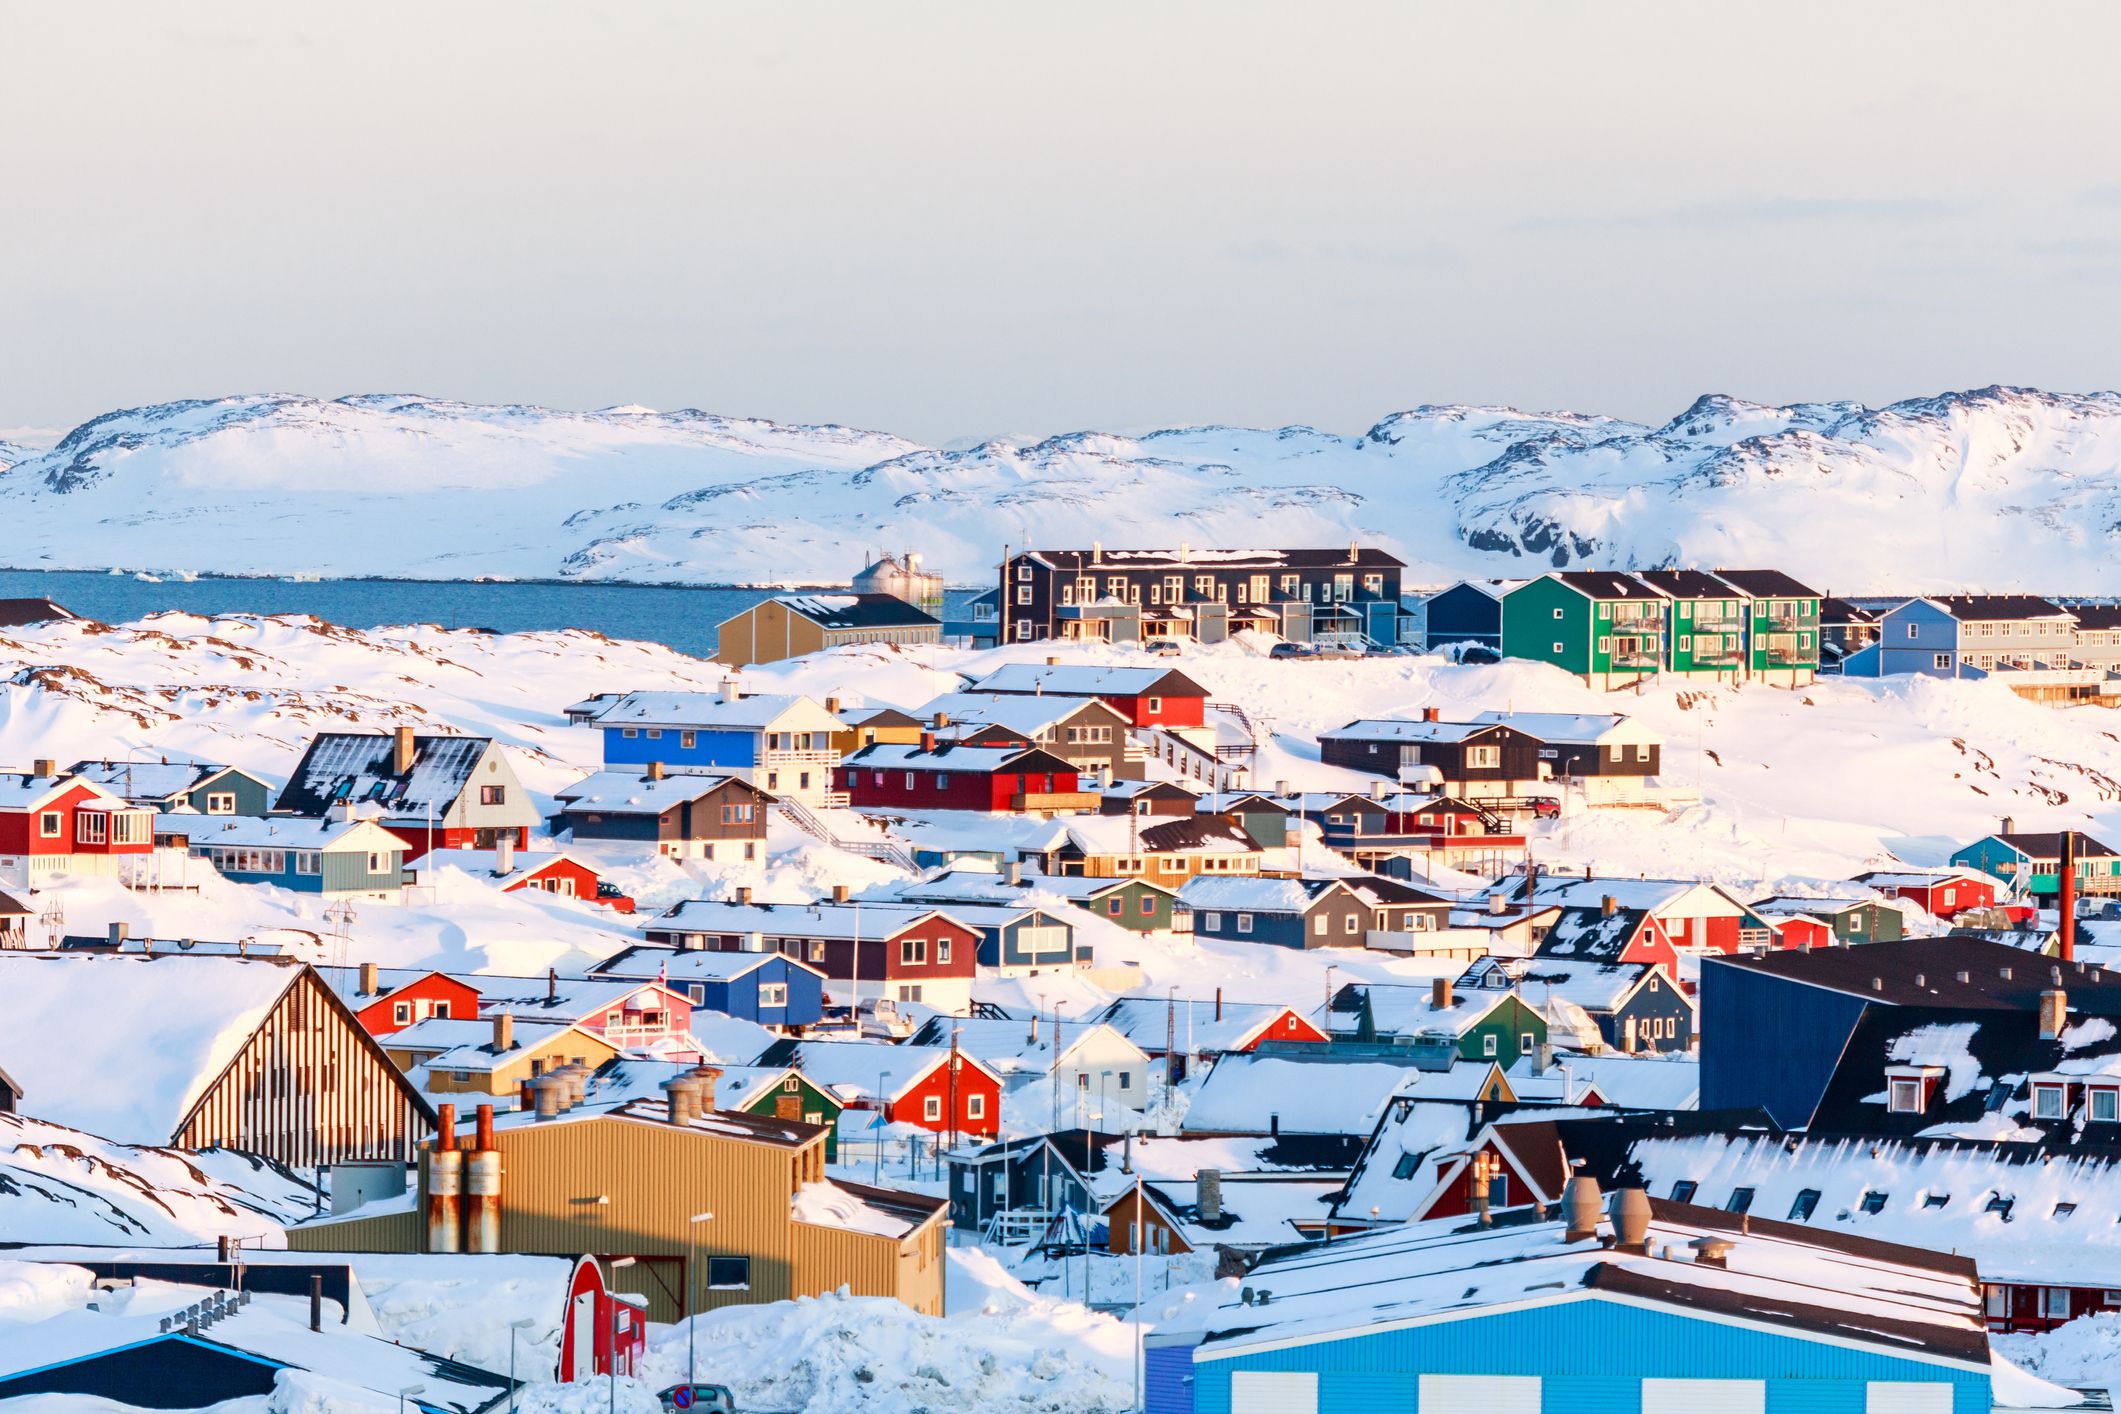 <p>Nuuk may only have around 18,000 residents, but it's got big ambitions to become the world’s first sustainable capital. That means the city aims to create environmentally responsible tourism, such as footbridges and heritage sites that highlight (and protect) the city’s natural beauty.</p>